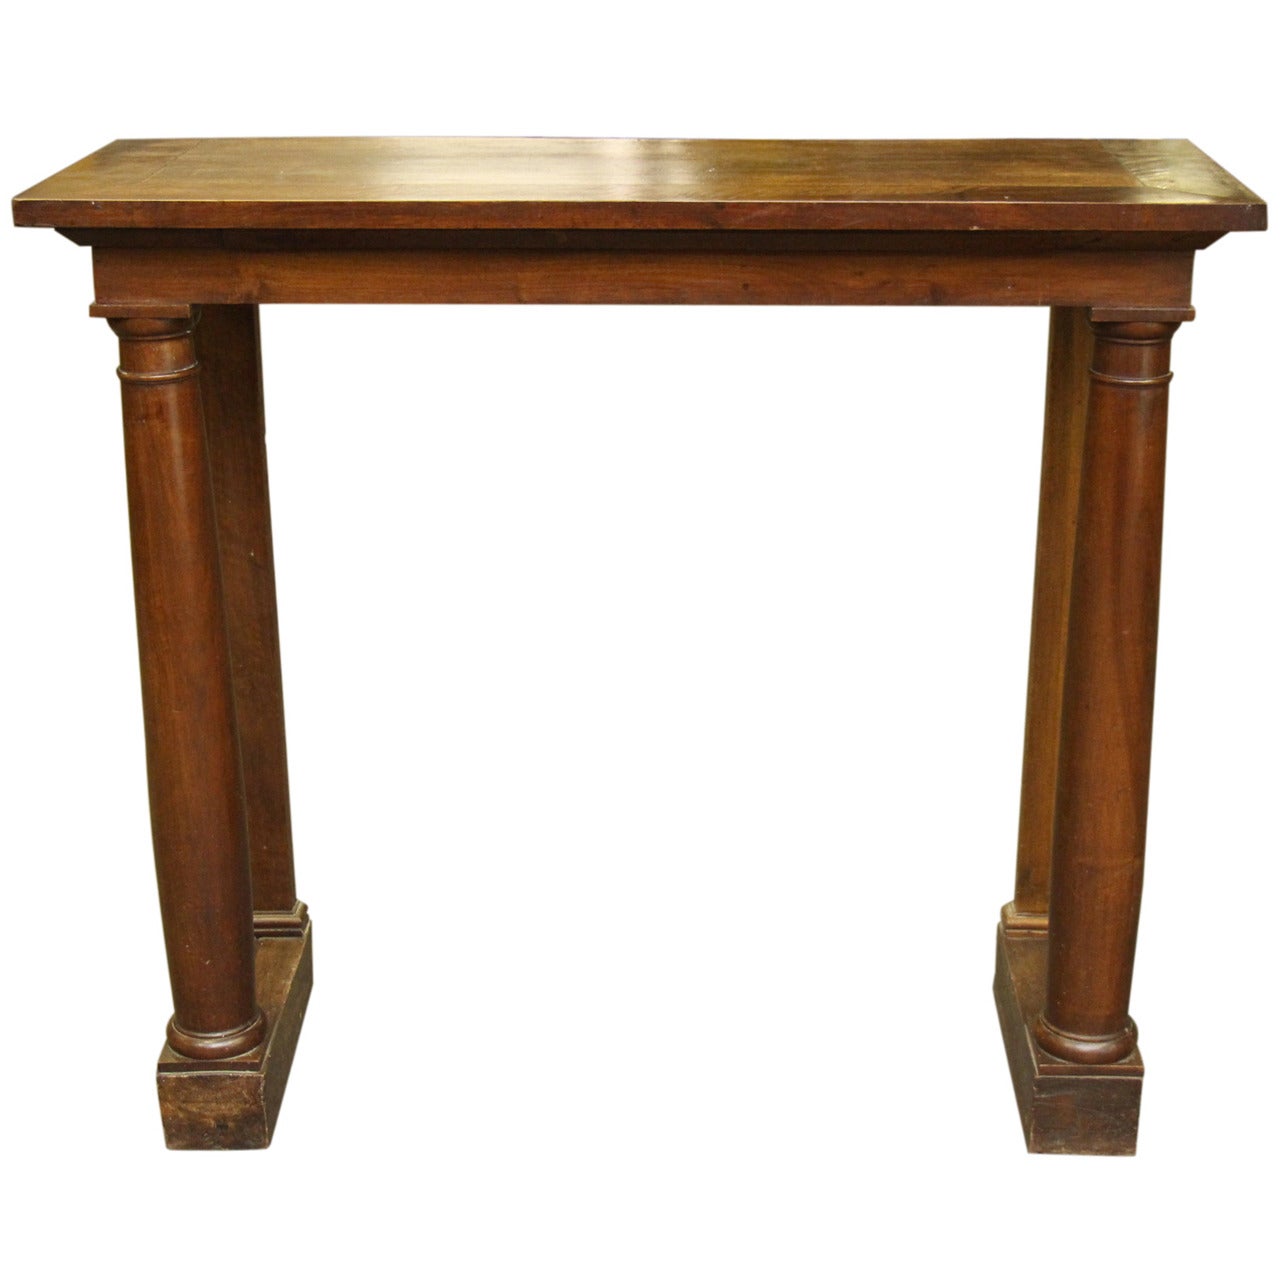 1920s French Wood Writing Console with Columns